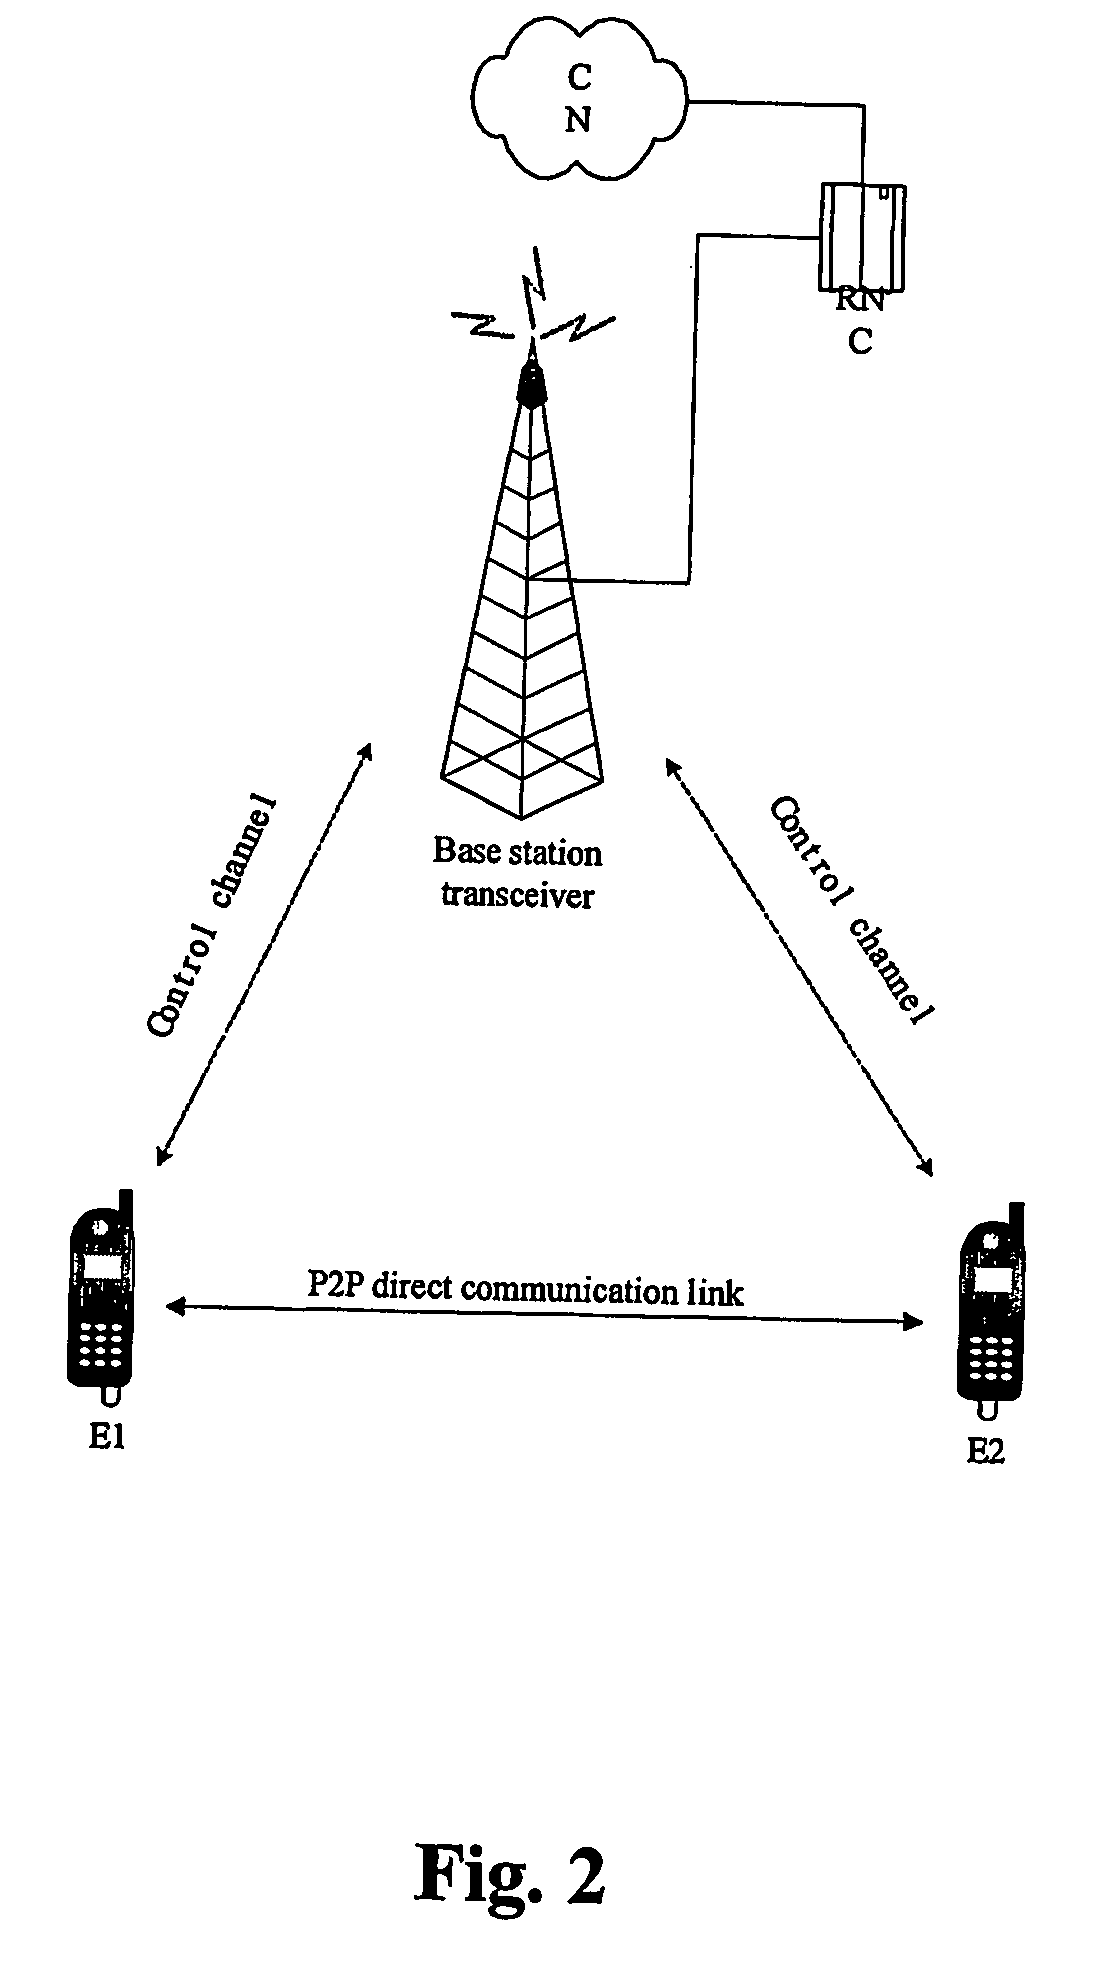 Distance dependent direct mode peer -to-peer communication establishment in a tdd cdma network